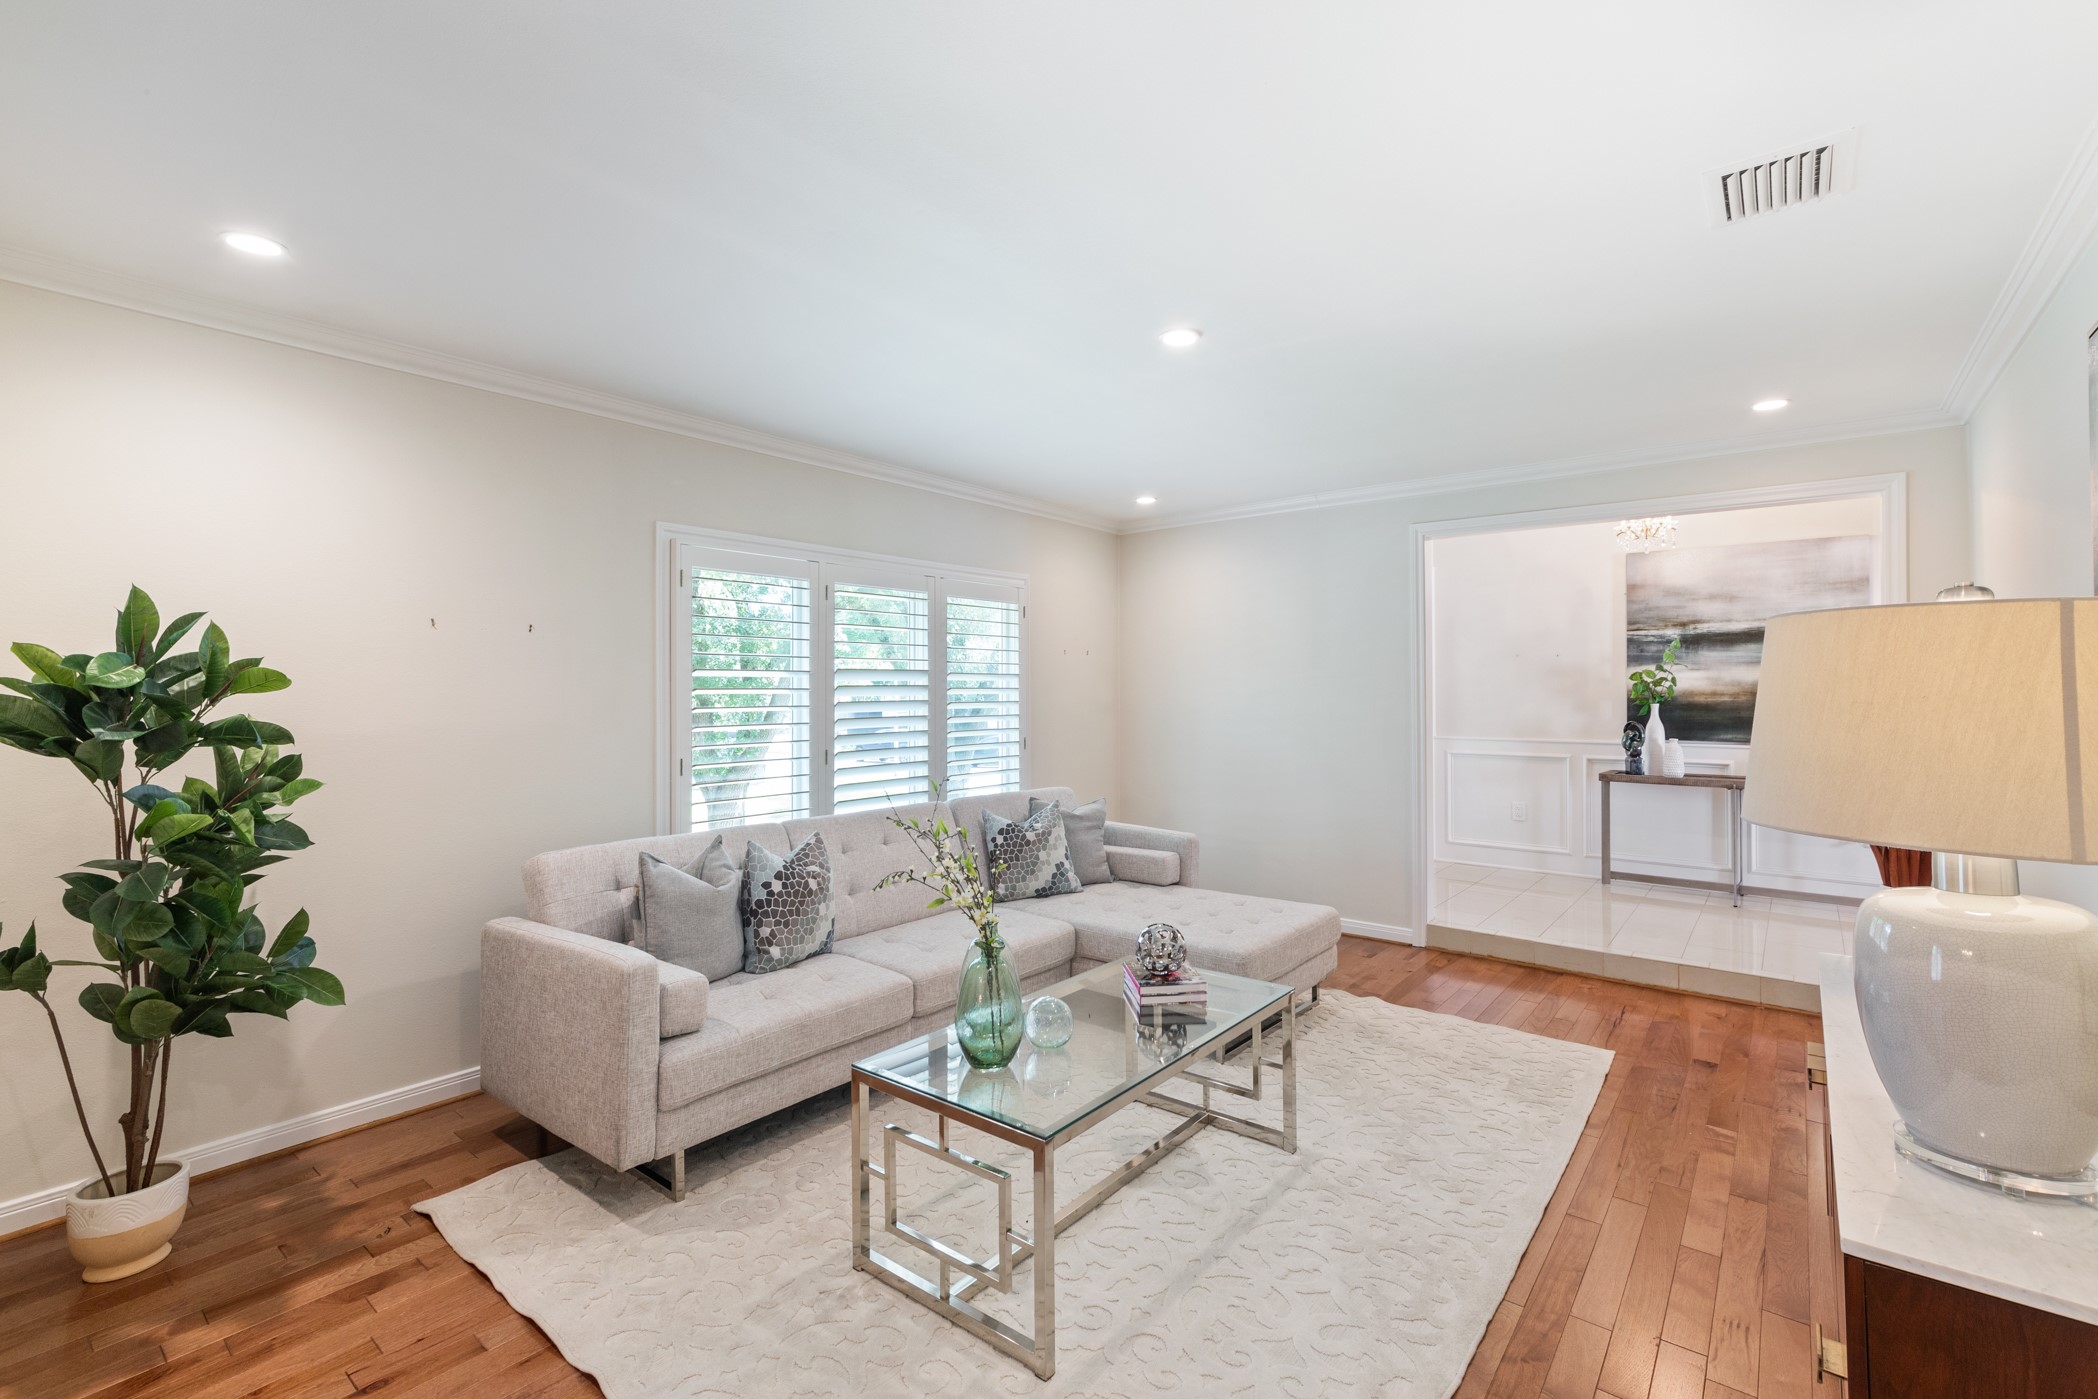 Crown molding accentuates the beauty of the home. - If you have additional questions regarding 5207 Braesvalley Drive  in Houston or would like to tour the property with us call 800-660-1022 and reference MLS# 44144550.